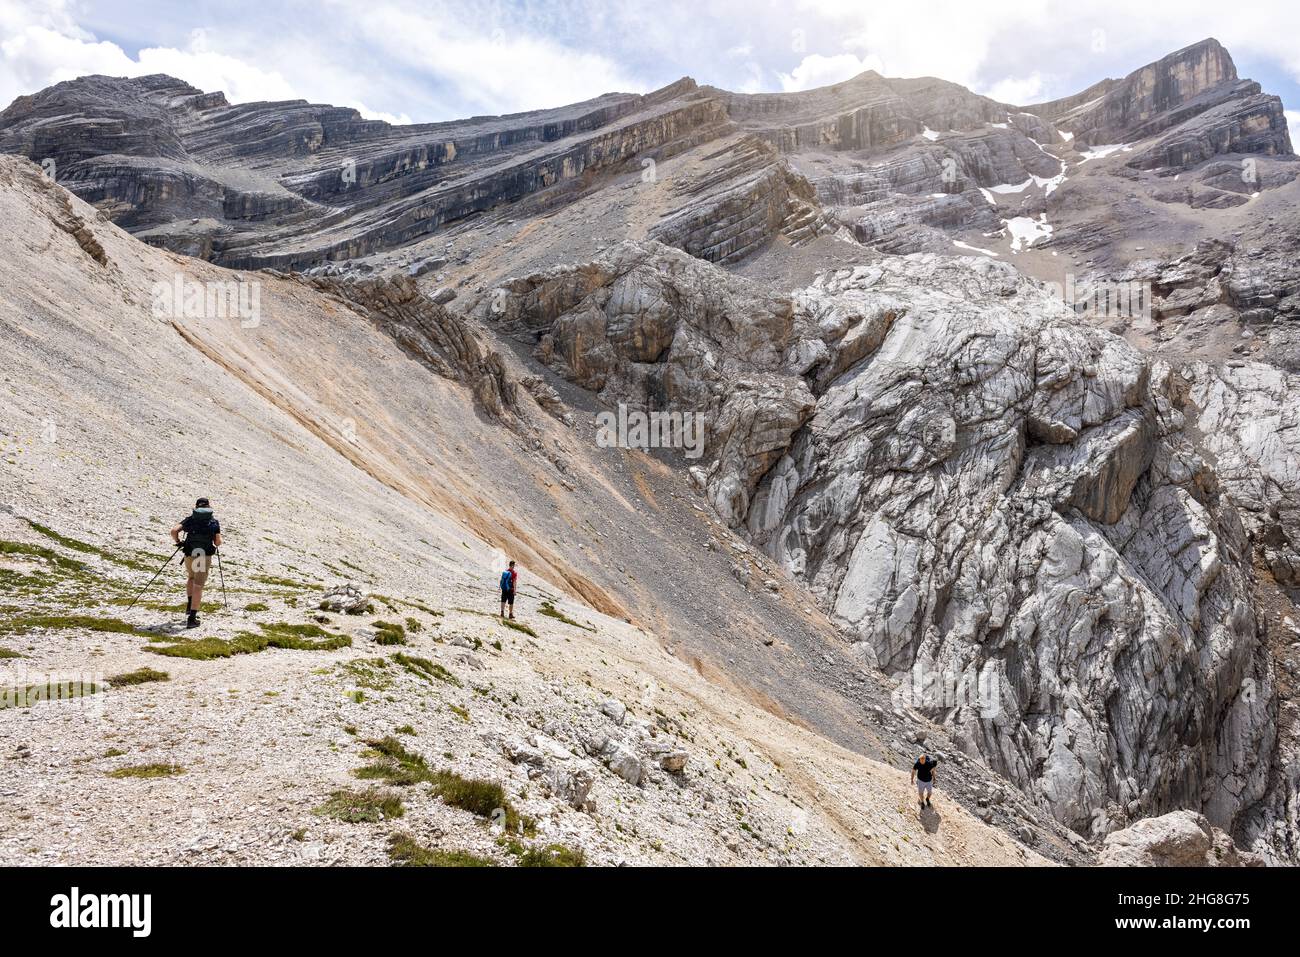 Hikers on their way down from a rough mountain top Stock Photo